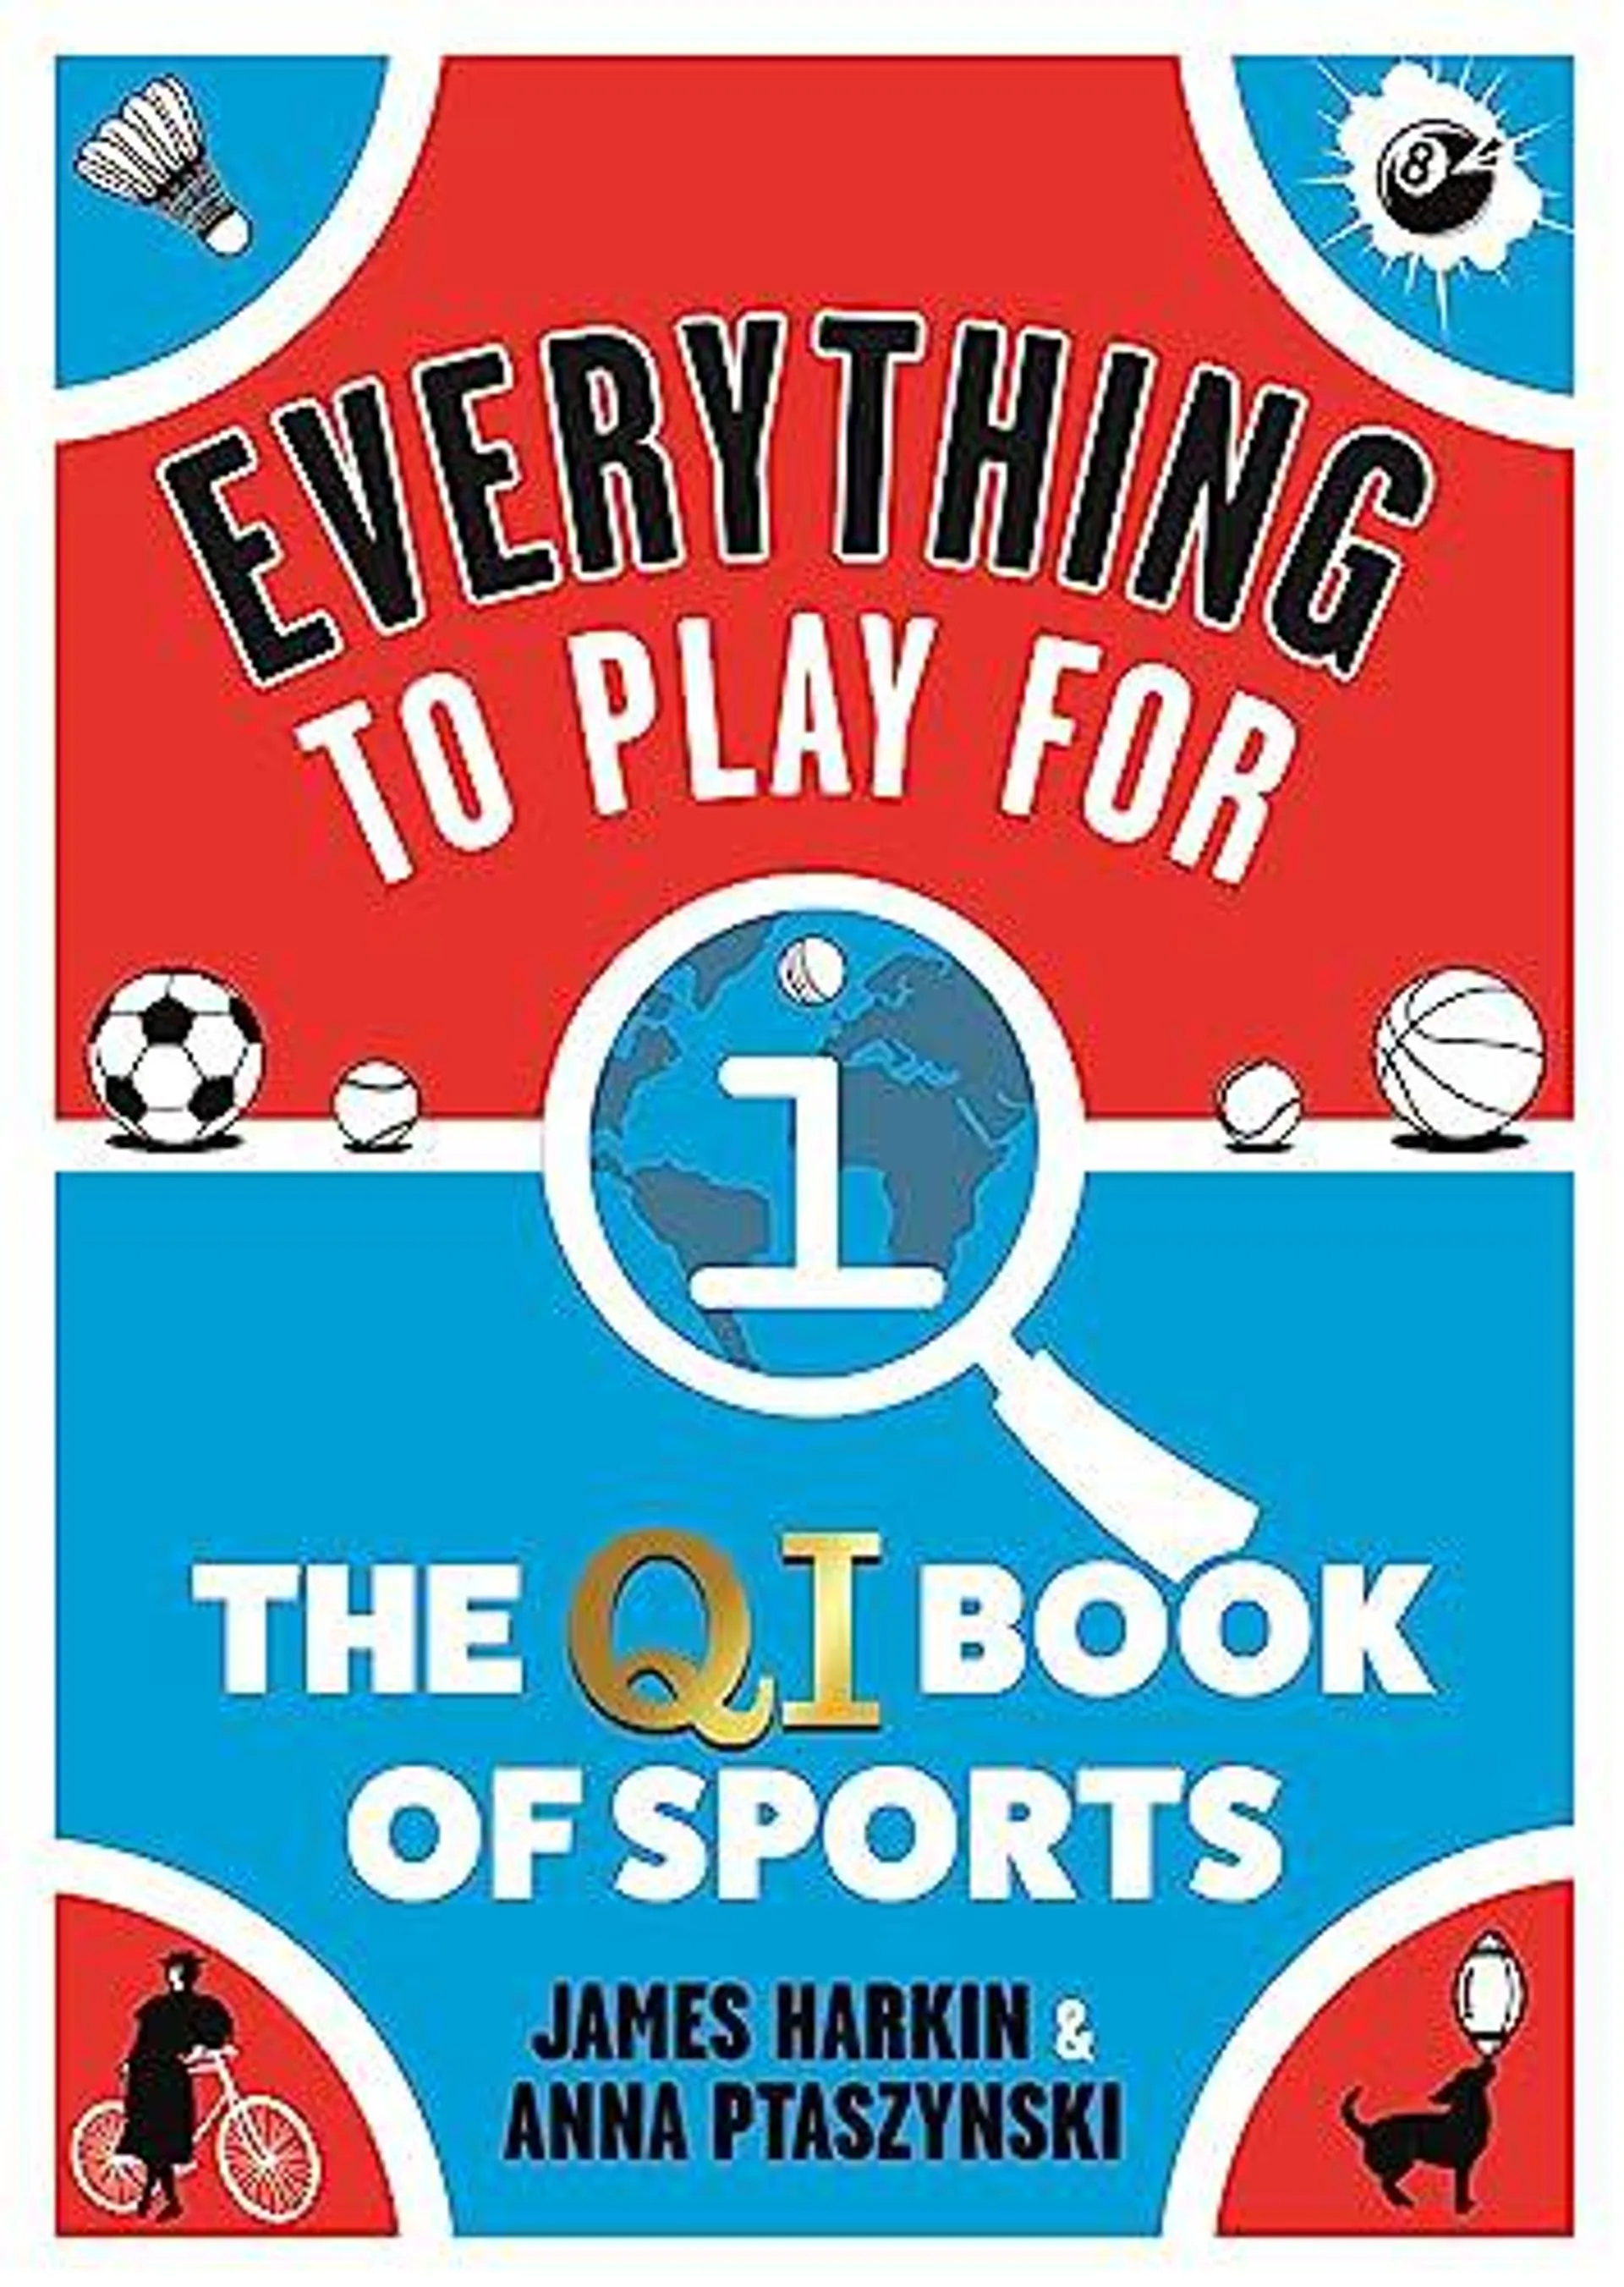 Everything to Play For by James Harkin